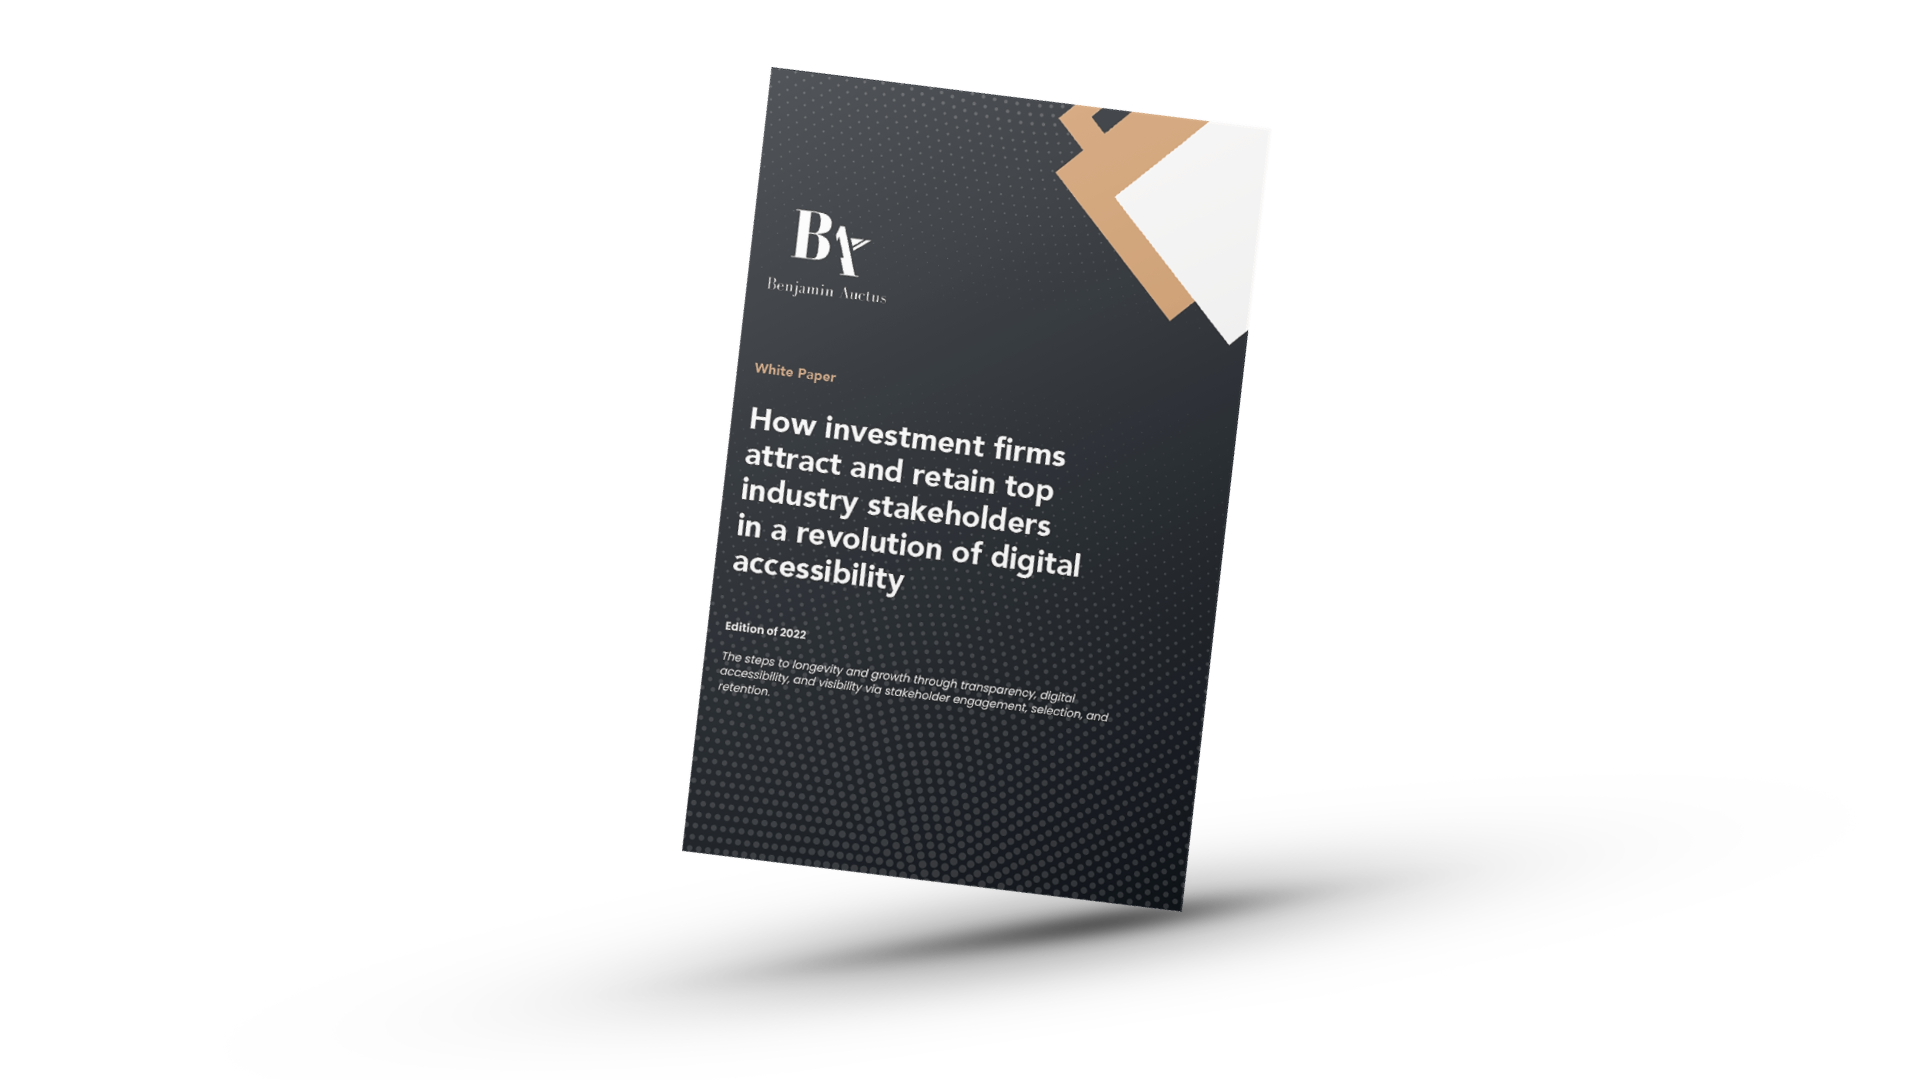 the WhitePaper on how investment firms attract and retain top industry stakeholders